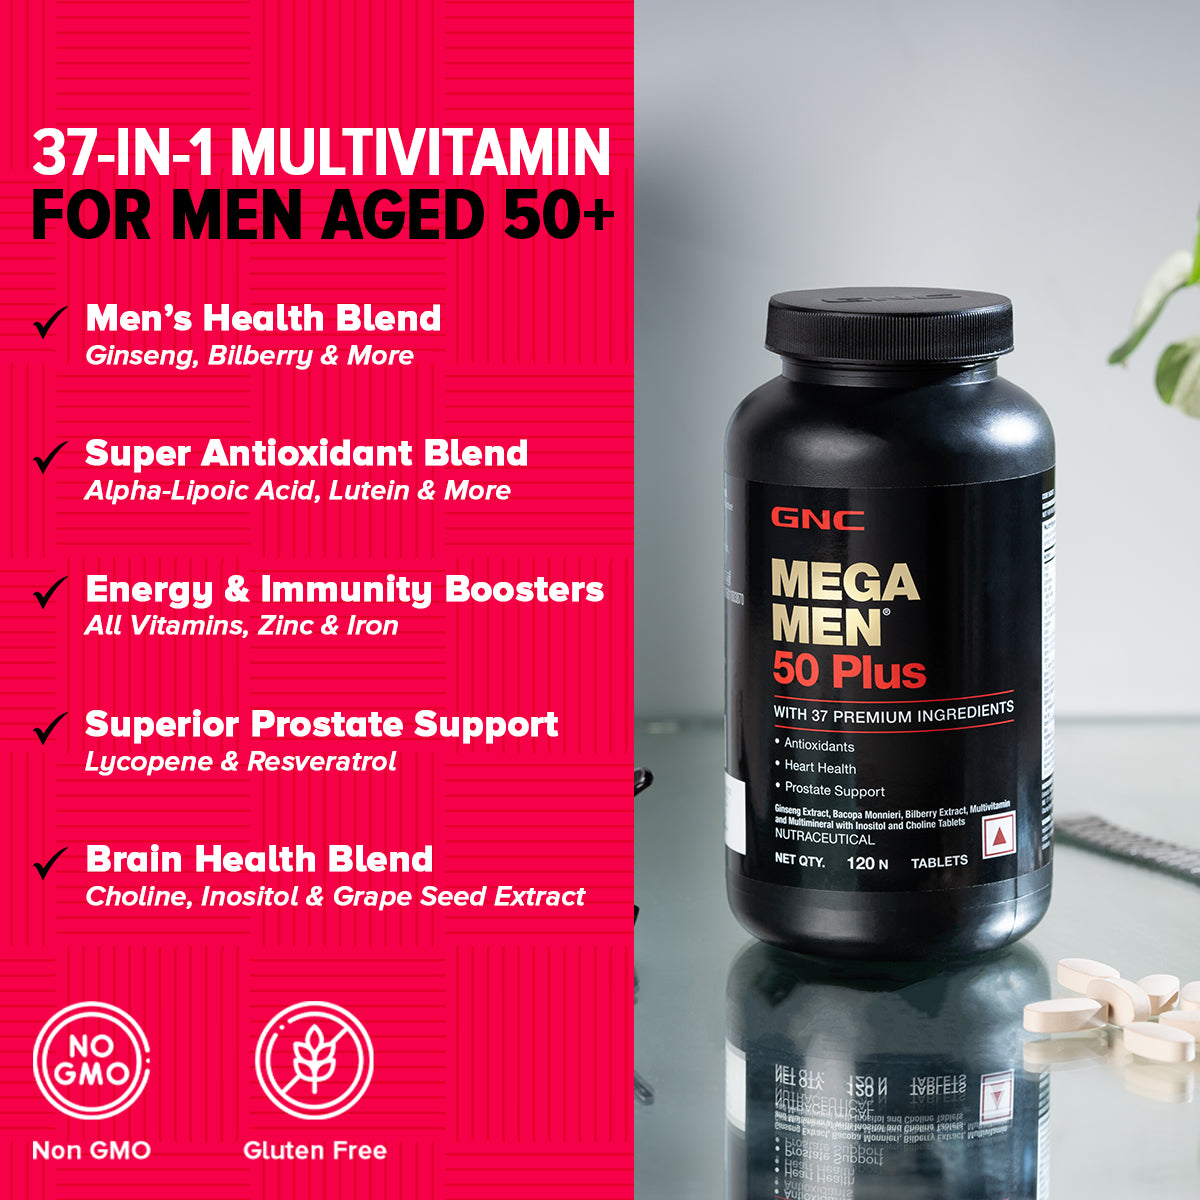 GNC Mega Men 50 Plus Multivitamin - For Healthy Heart, Prostate Support & Well-Being